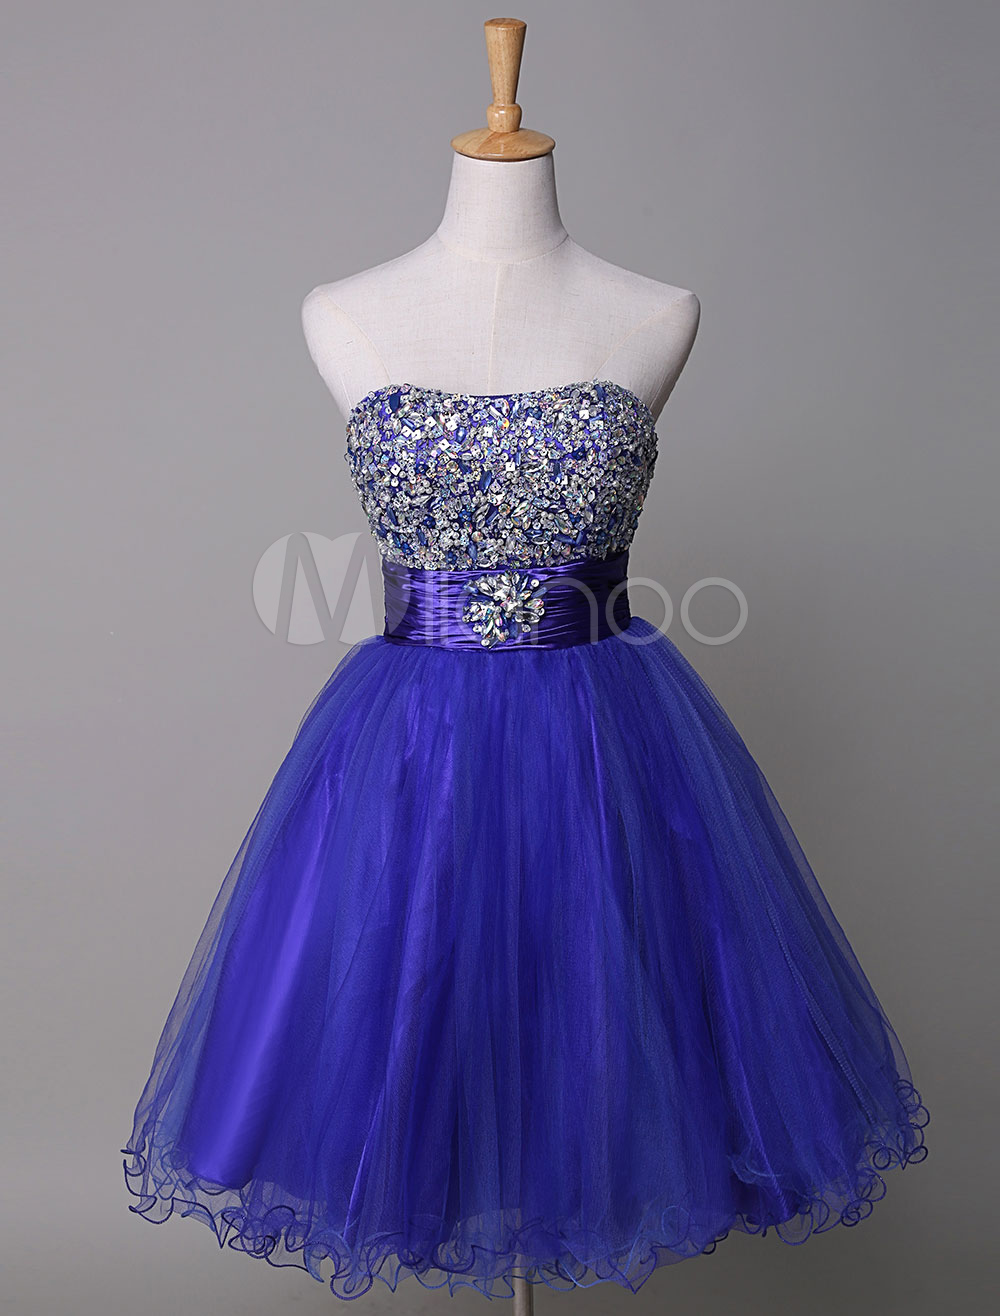 Strapless Prom Dress Royal Blue Rhinestone Beading Tulle A-Line Mini Homecoming Dress With Sash (Wedding Cheap Party Dress) photo